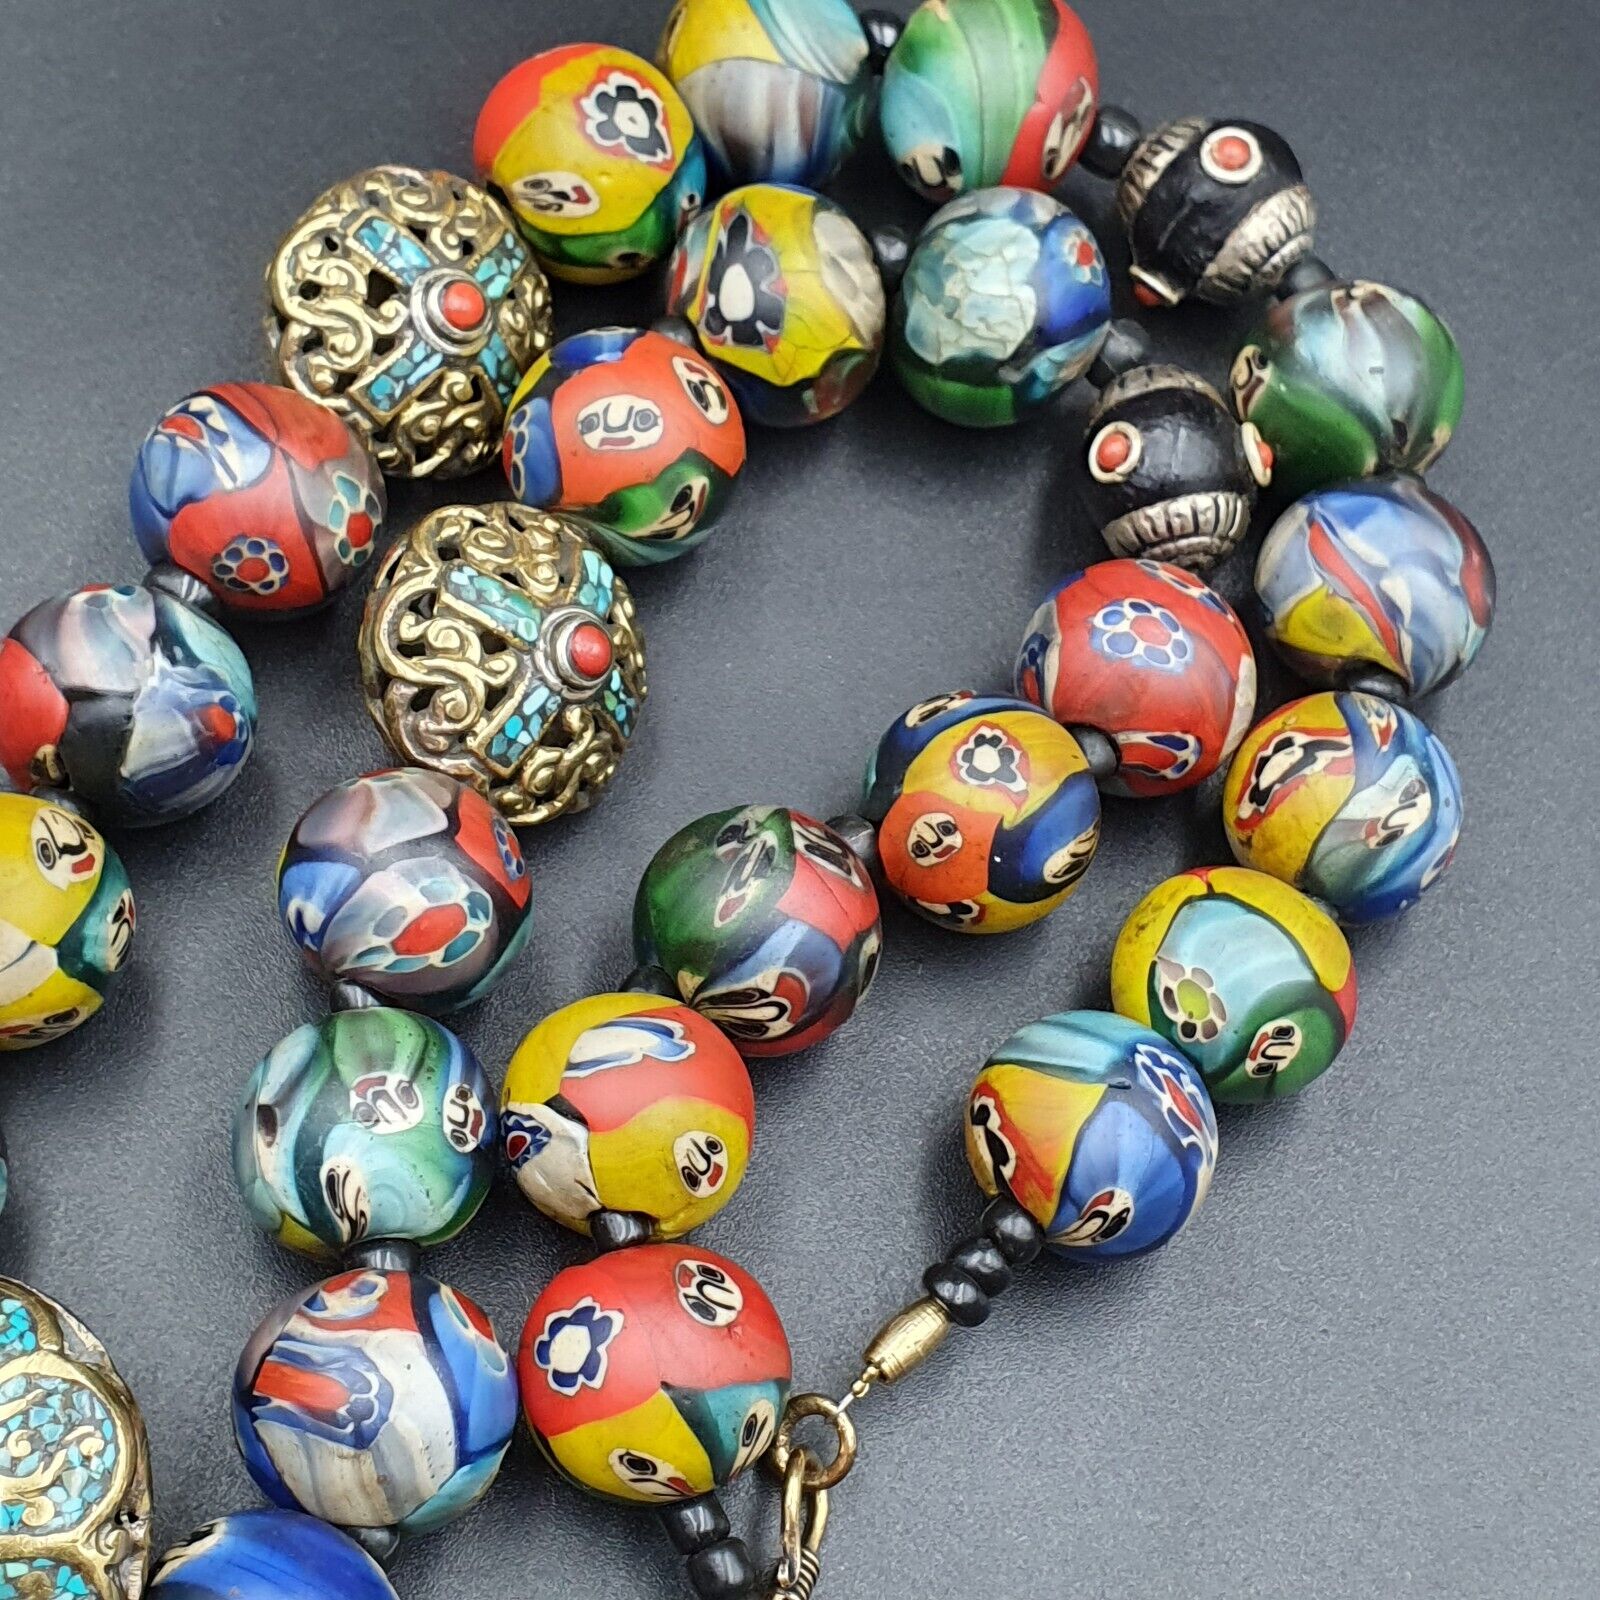 Beautiful Old Tibetan Trade Jewelry With Coral & Turquoise Necklace